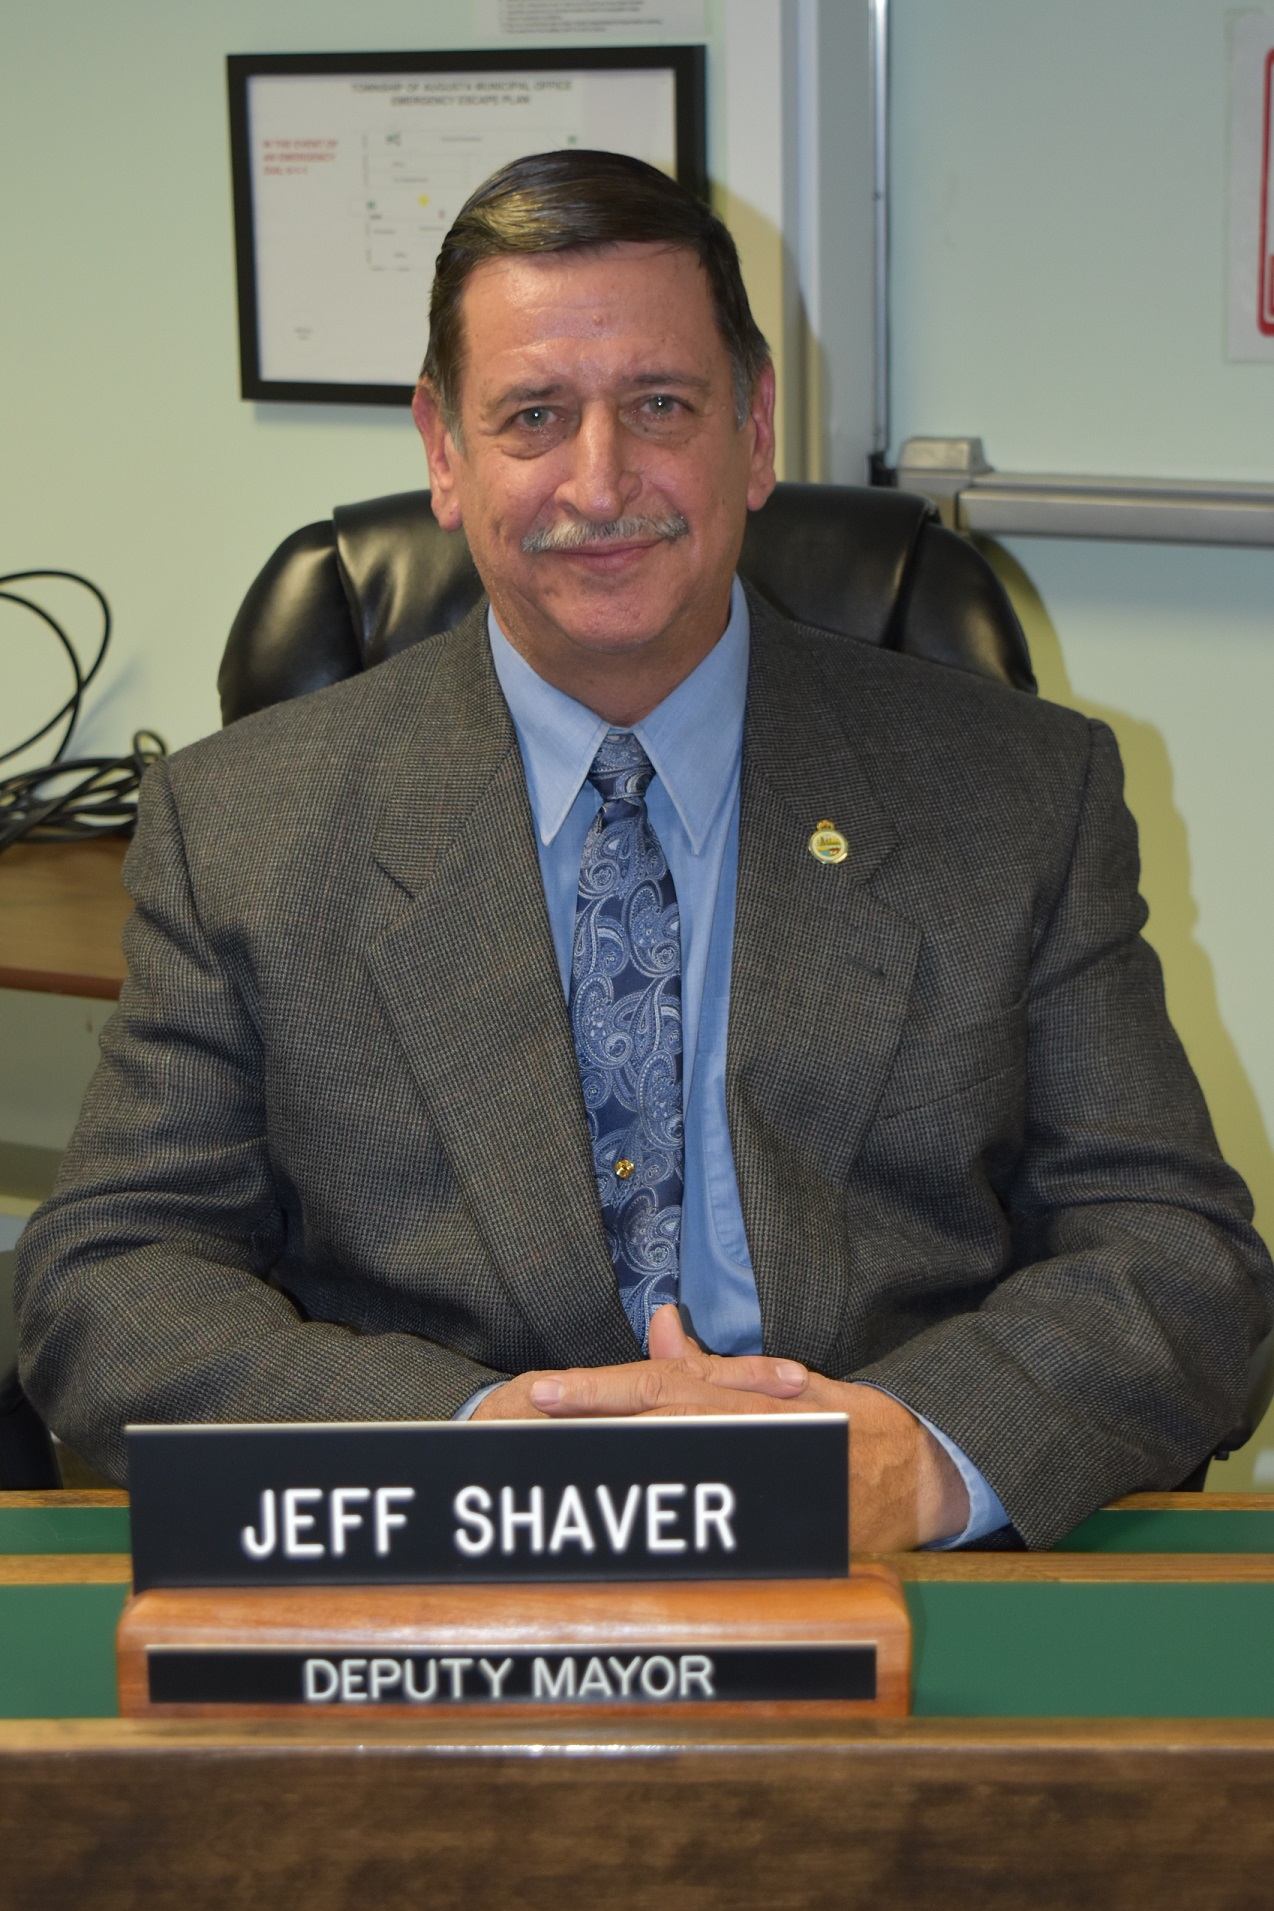 jeff shaver in his seat in the council chambers